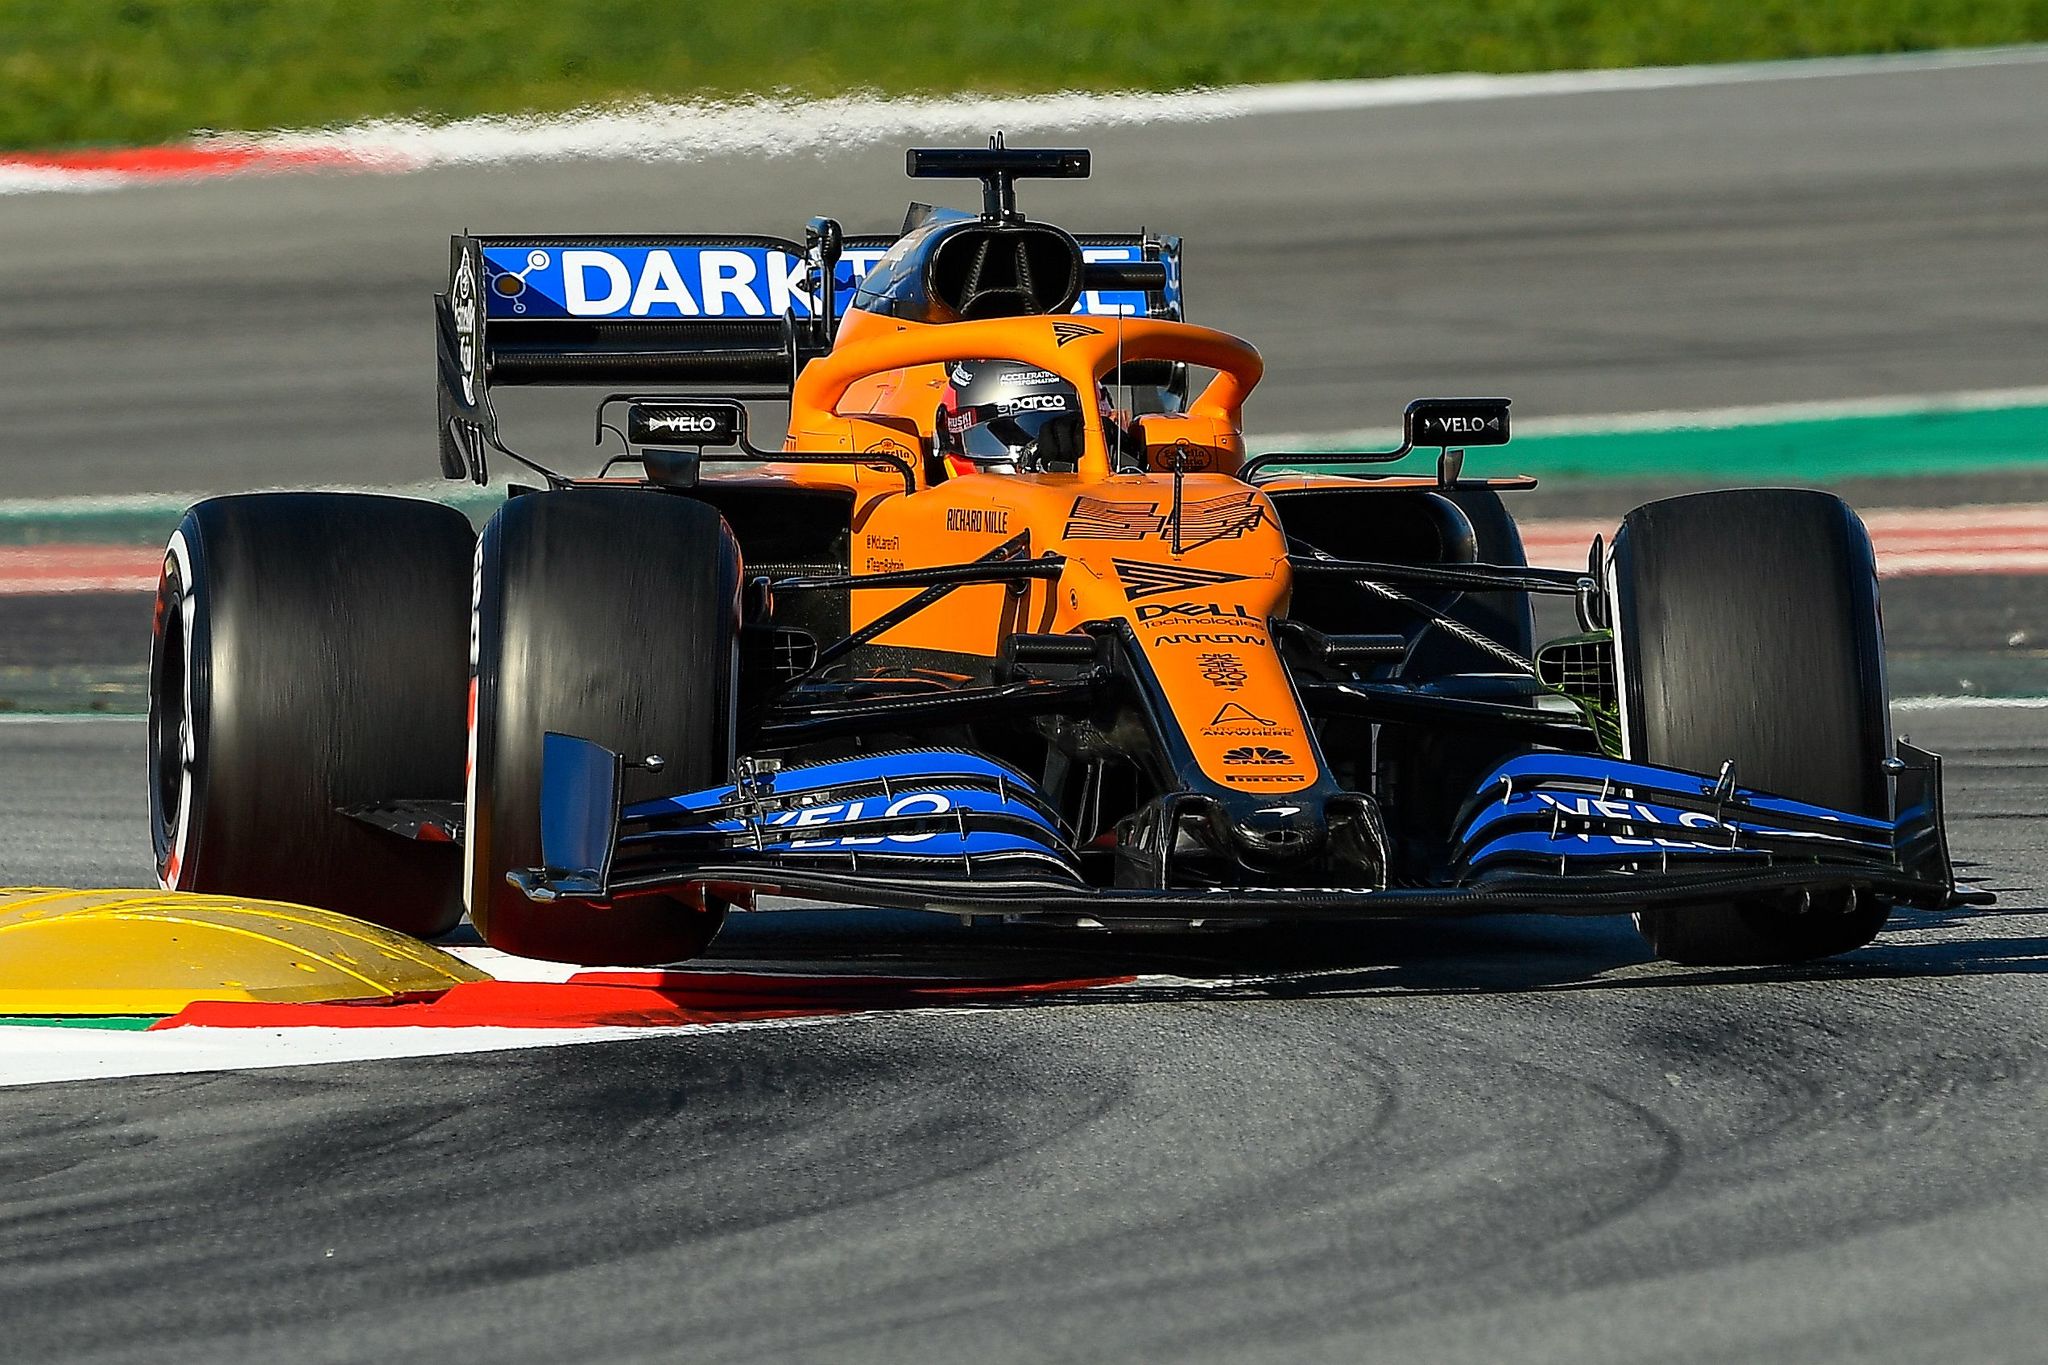 McLarens Spanish driver Carlos lt;HIT gt;Sainz lt;/HIT gt; Jr takes part in the tests for the new Formula One Grand Prix season at the Circuit de Catalunya in Montmelo in the outskirts of Barcelona on February 28, 2020. (Photo by Josep LAGO / AFP)